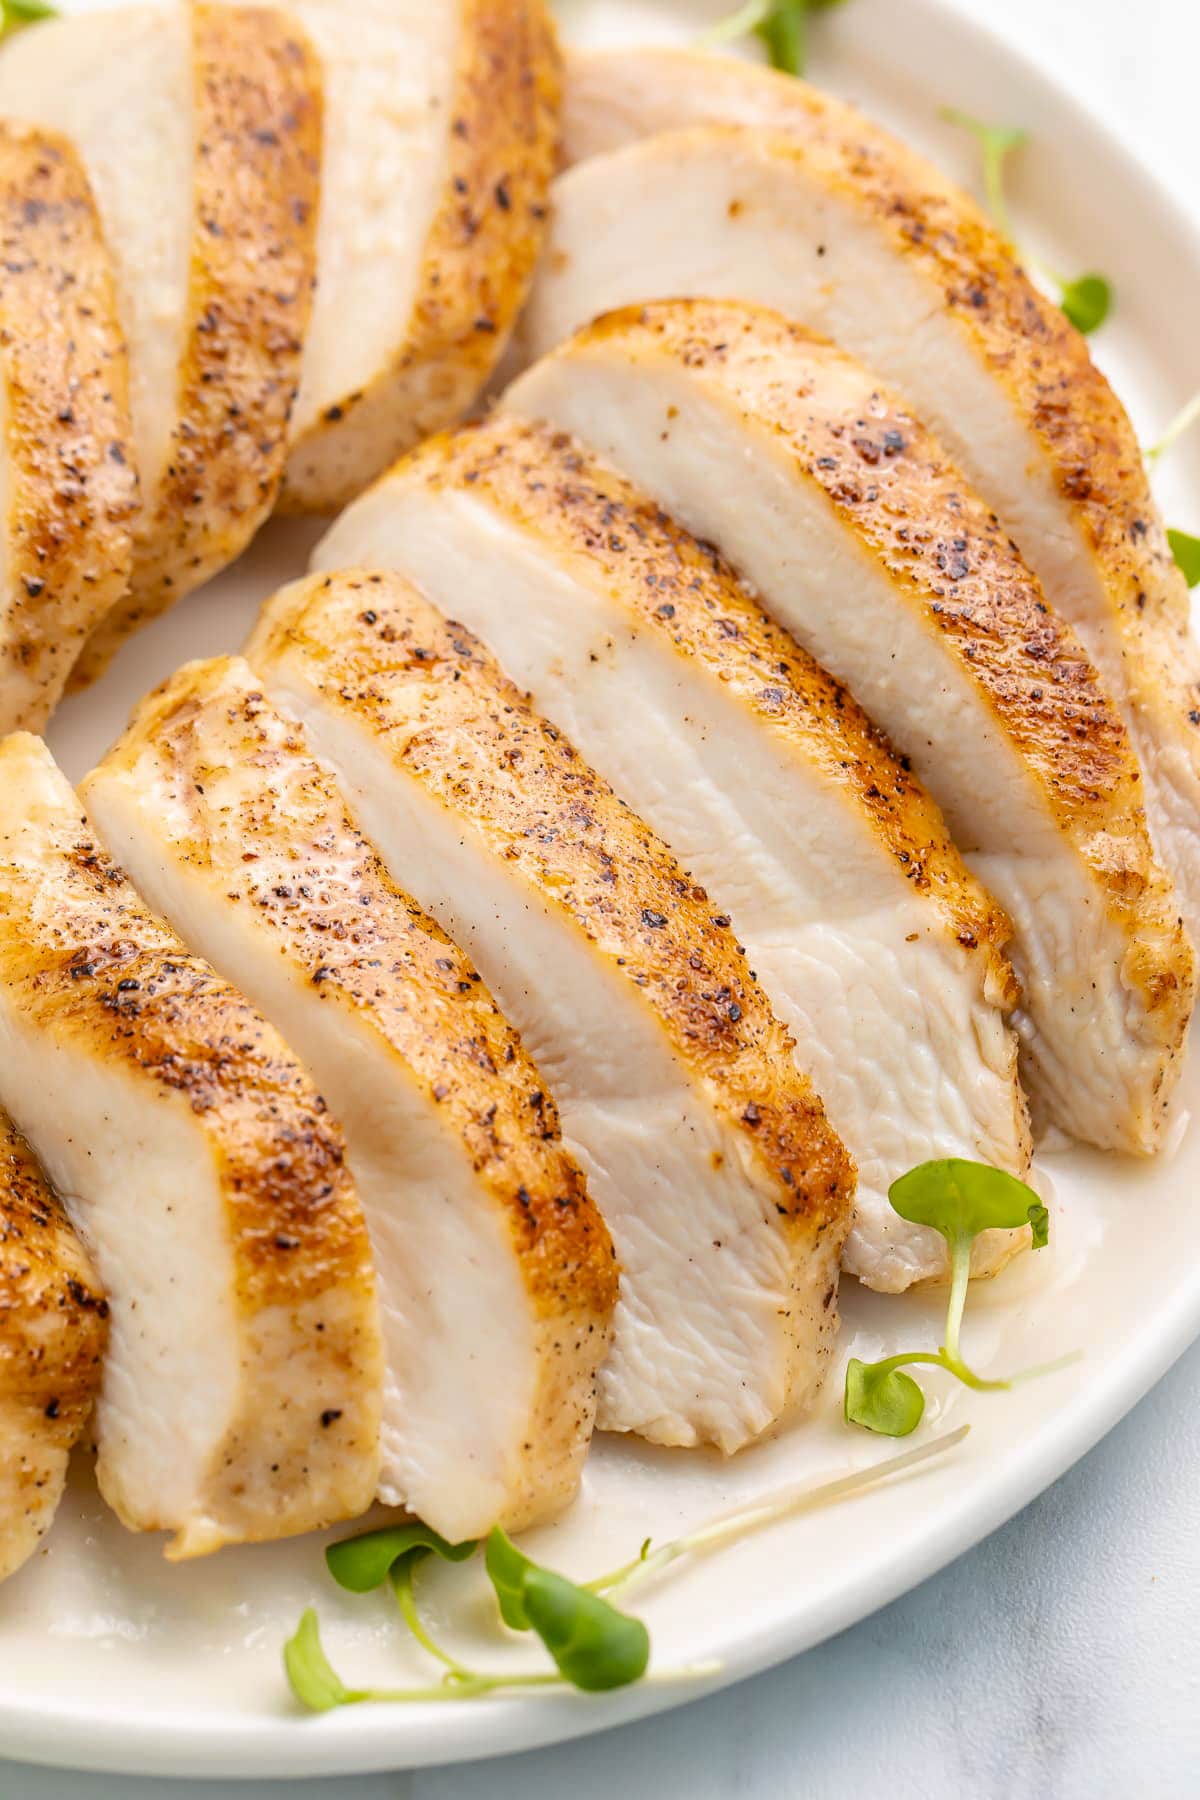 Chicken breasts, cooked until tender in a sous vide water bath, then sliced and plated on a white plate.